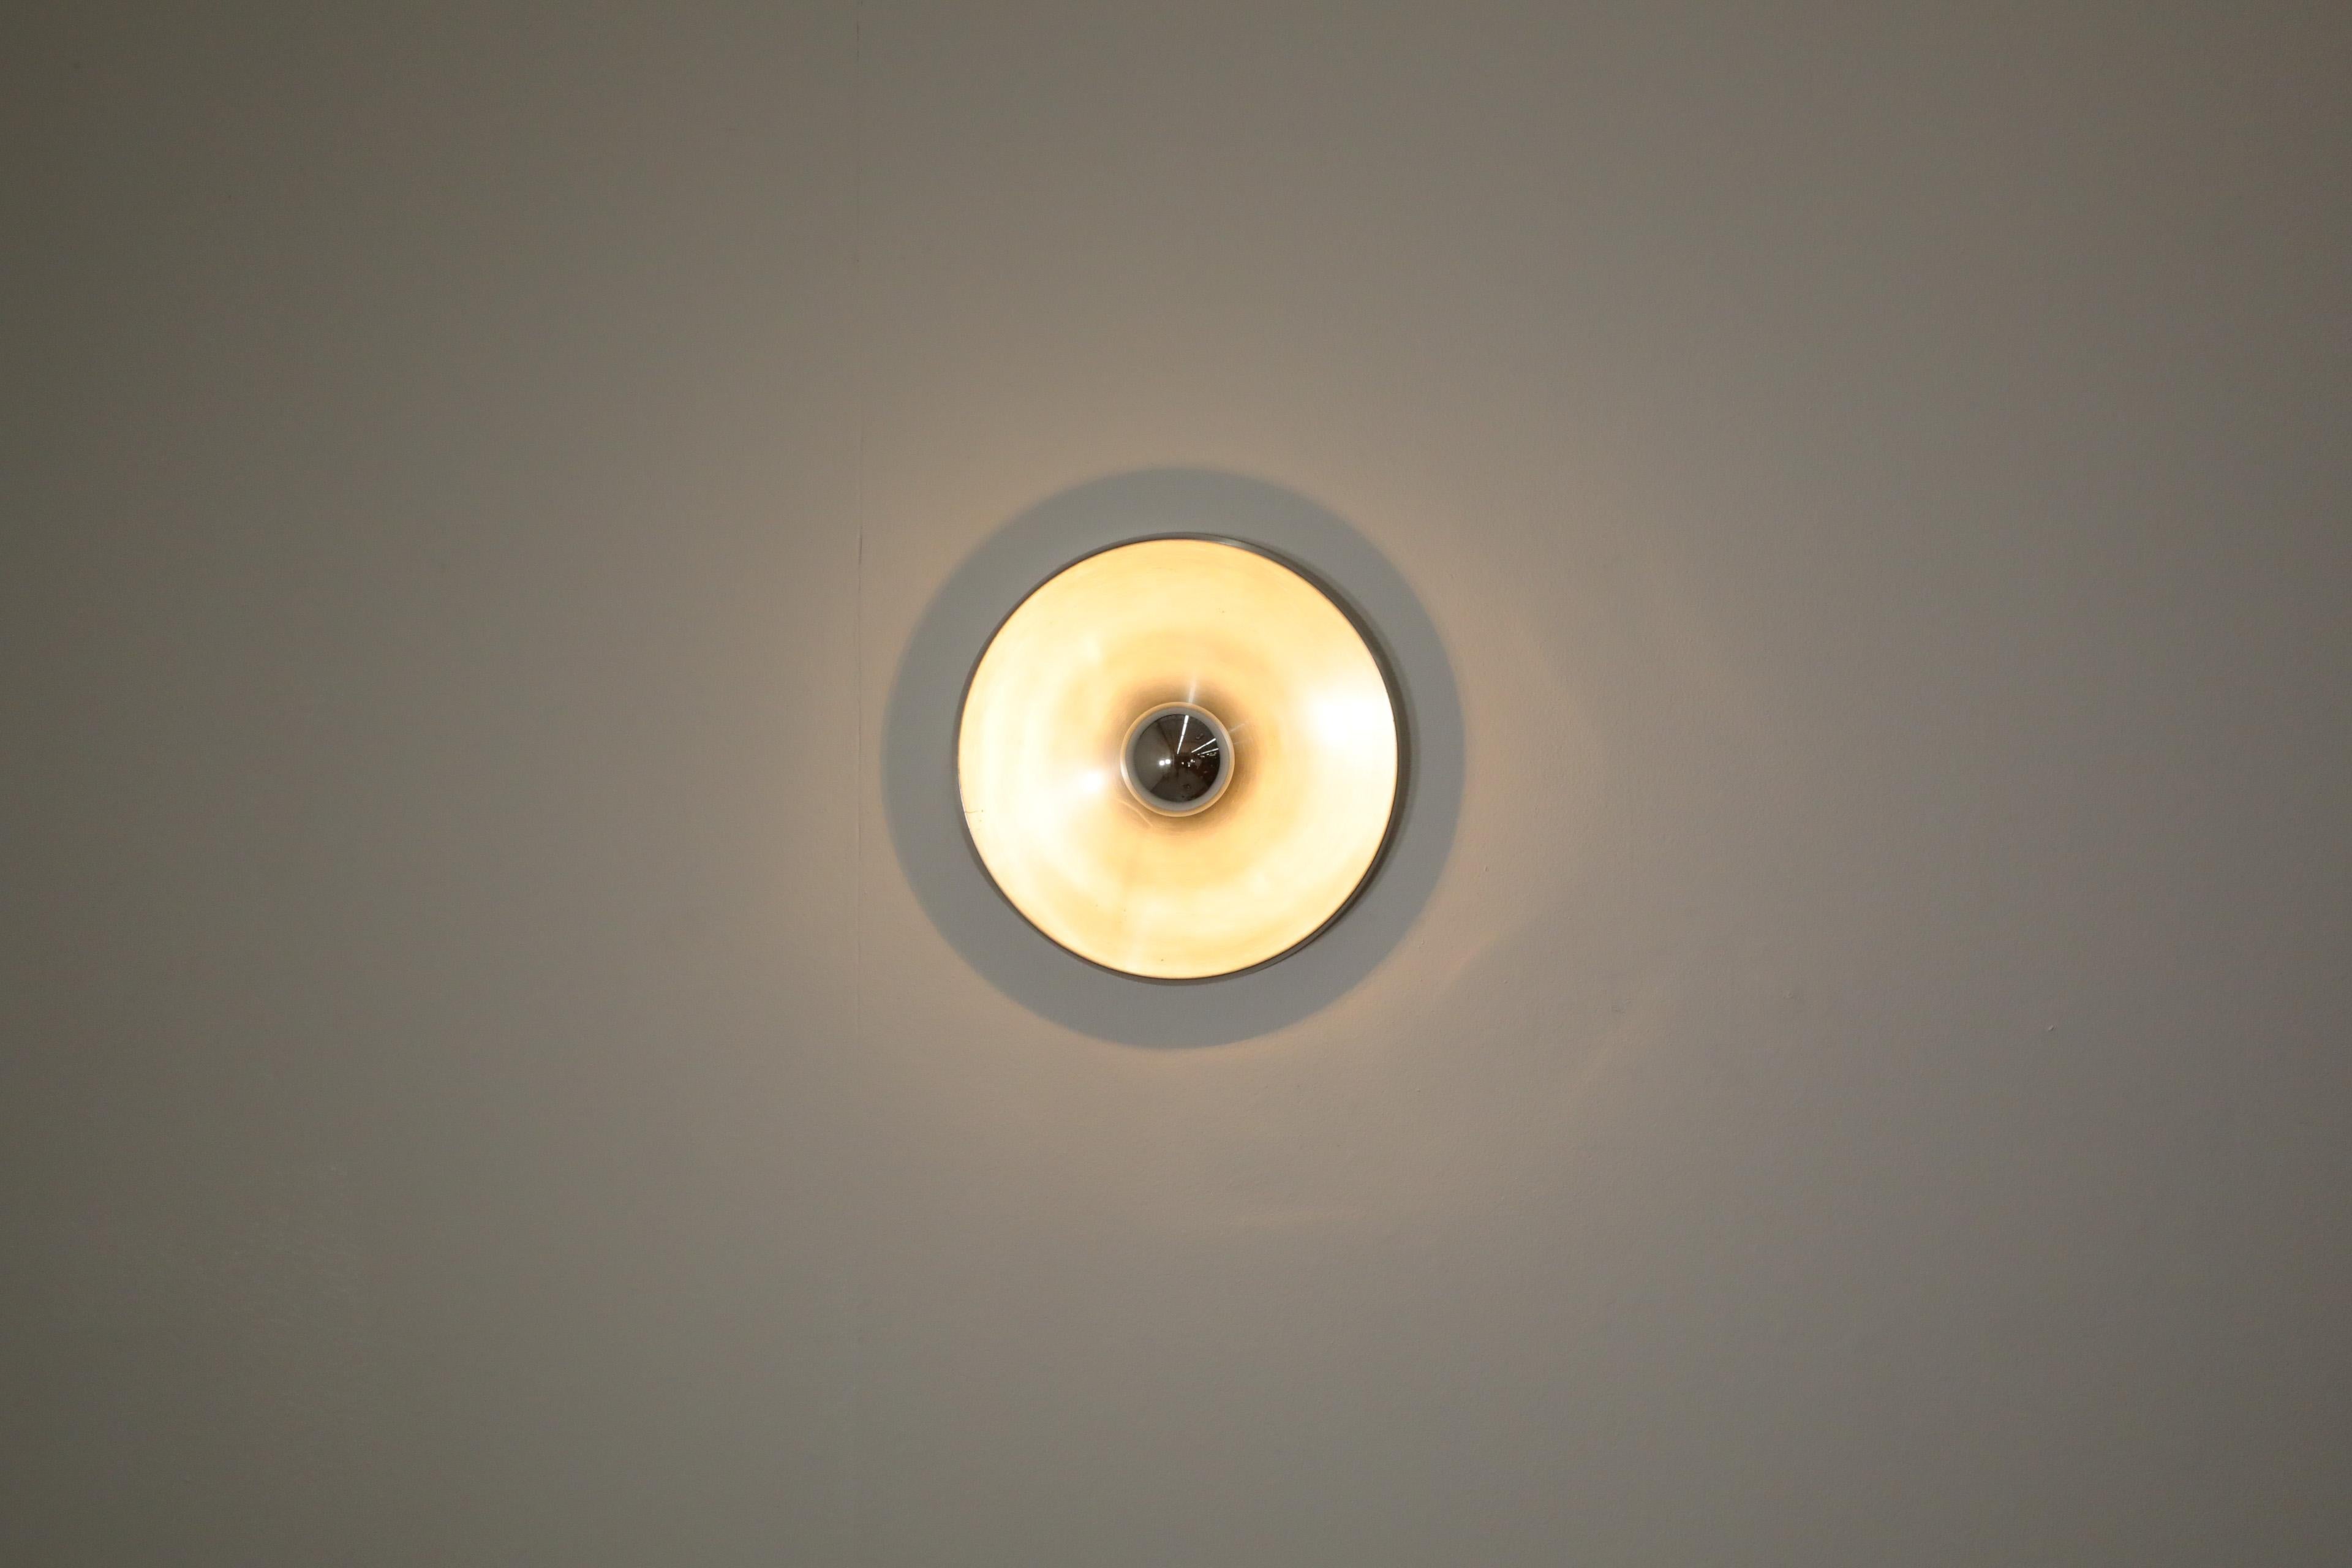 Sleekly designed Honsel Leuchten flush mount ceiling sconce. A stunning flush mount ceiling or wall light consisting of a single molded aluminum disc and shown with a silver tipped bulb. Selected by French design great Charlotte Perriand for the